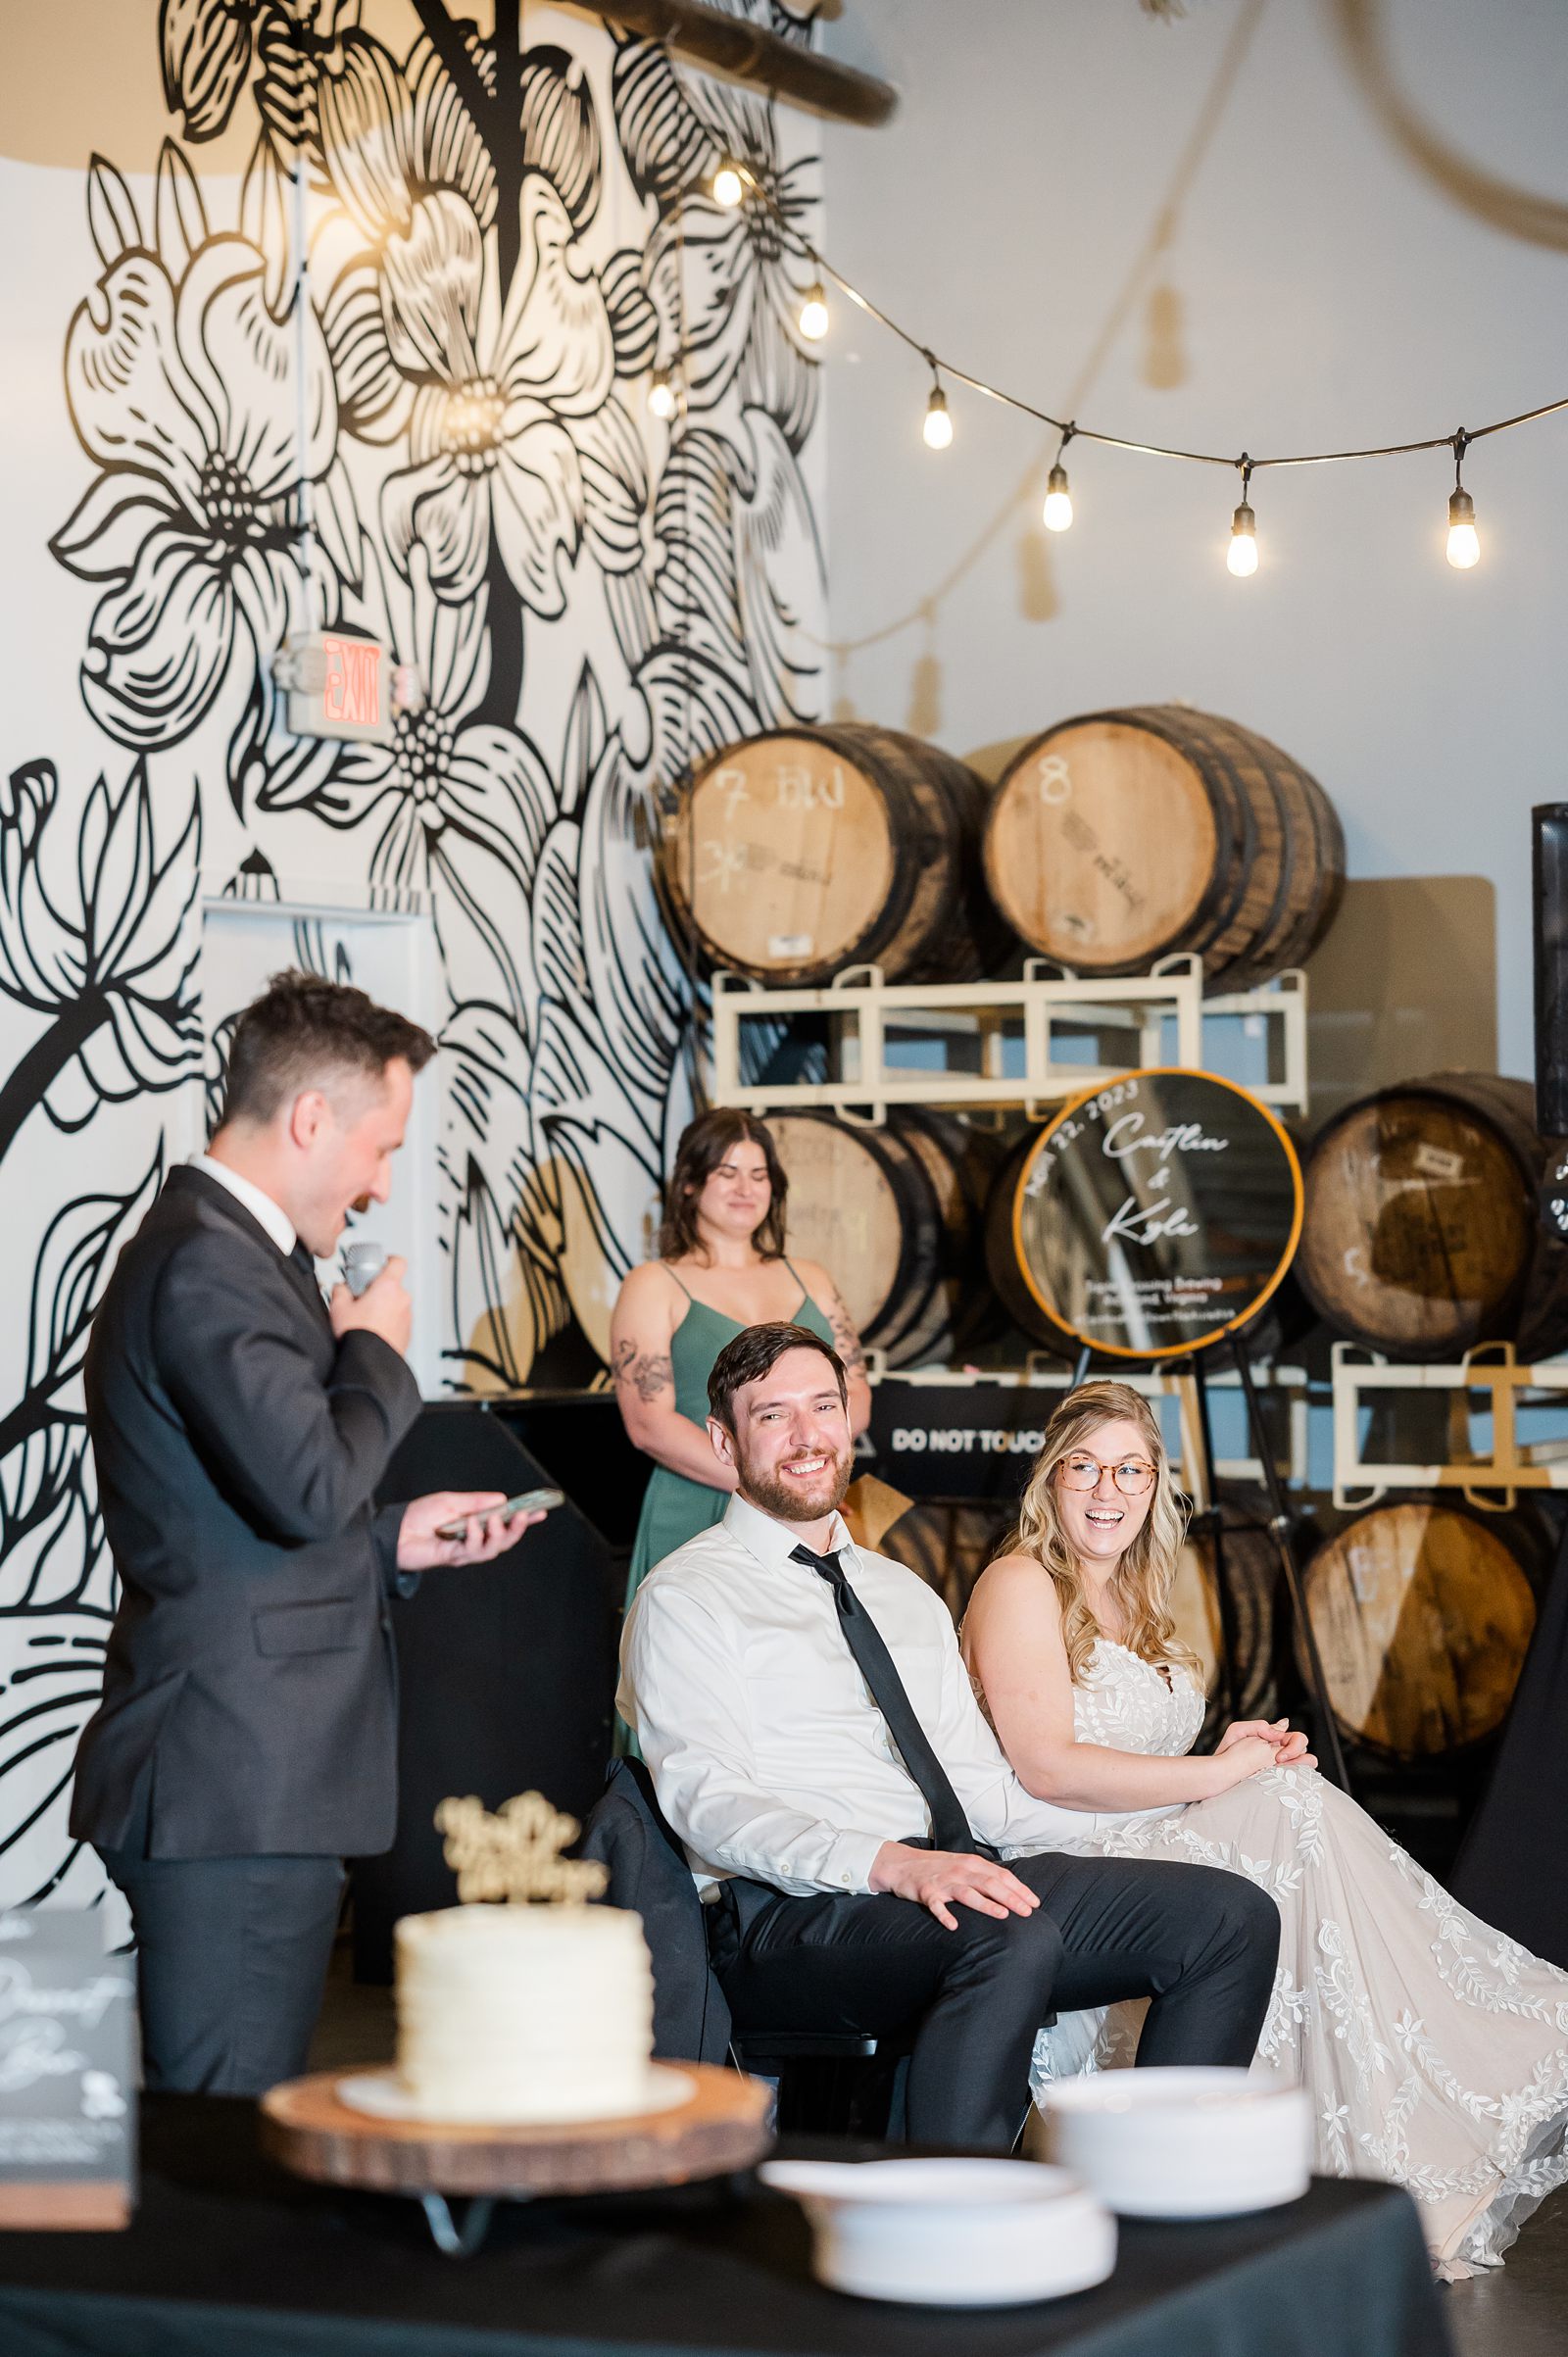 Bride and Groom Reactions During Toasts at Triple Crossing Beer Wedding Reception